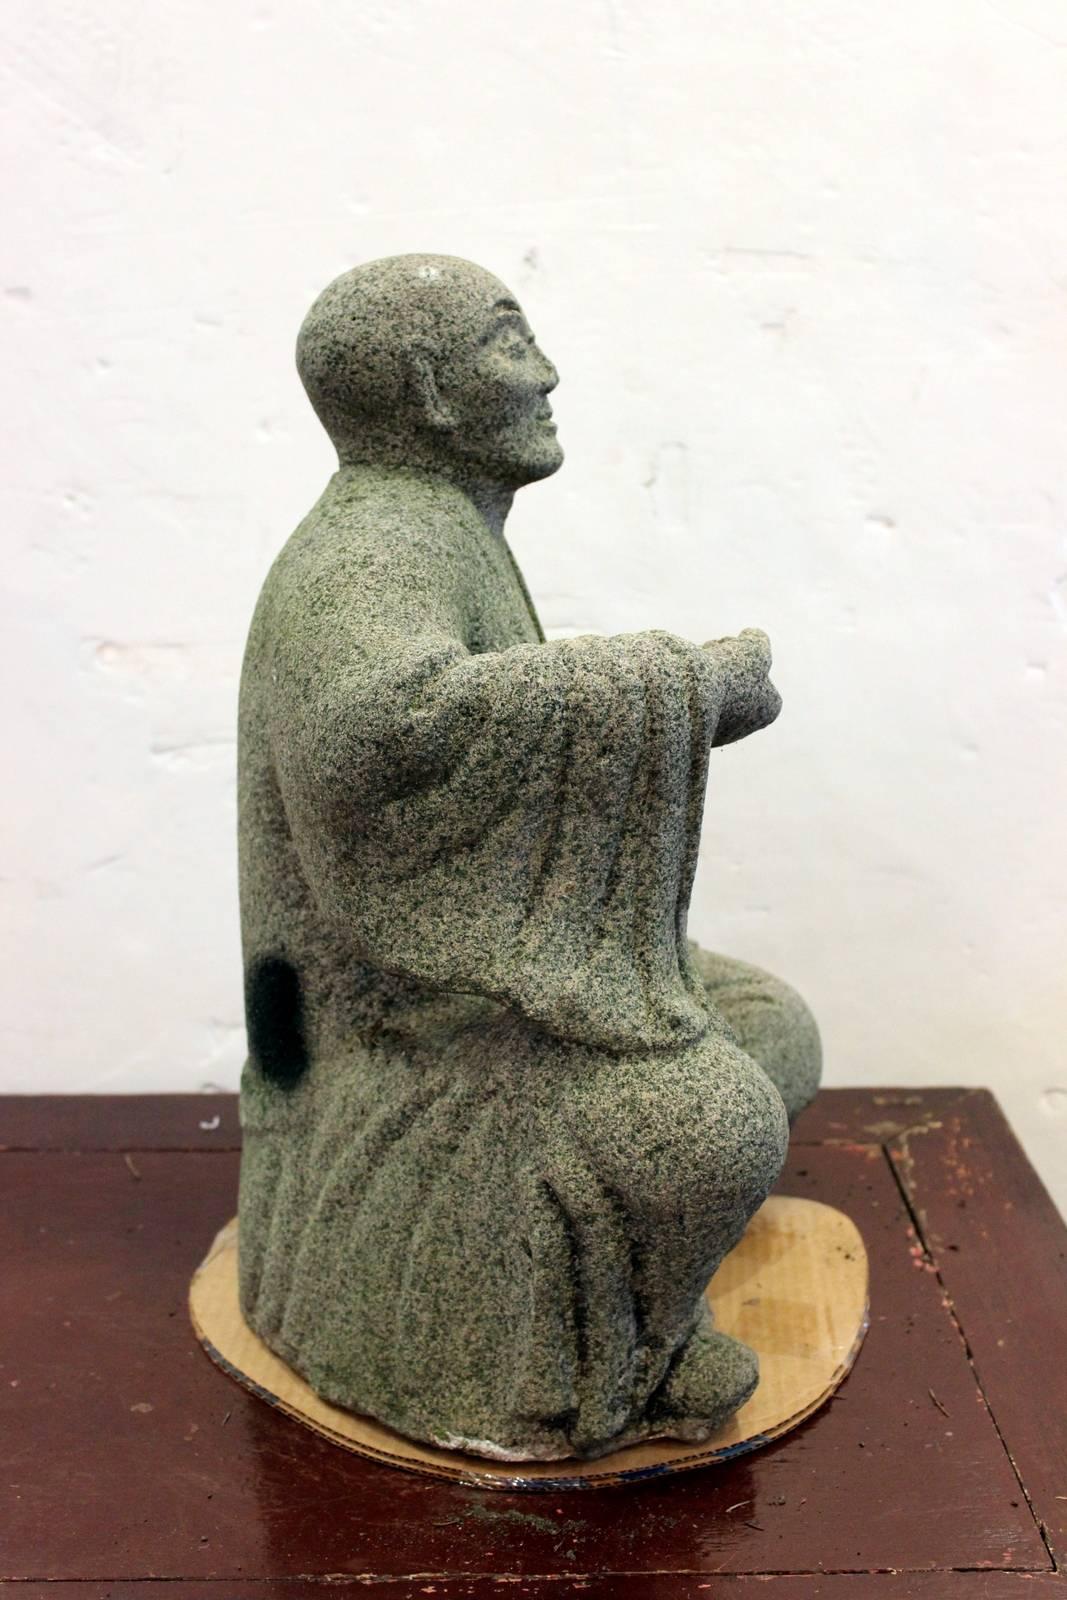 Japanese carved stone (possible Granite) sculpture of a monk from the late 18th to early 19th century. The surface is slightly worn slightly more textured than a honed finish.